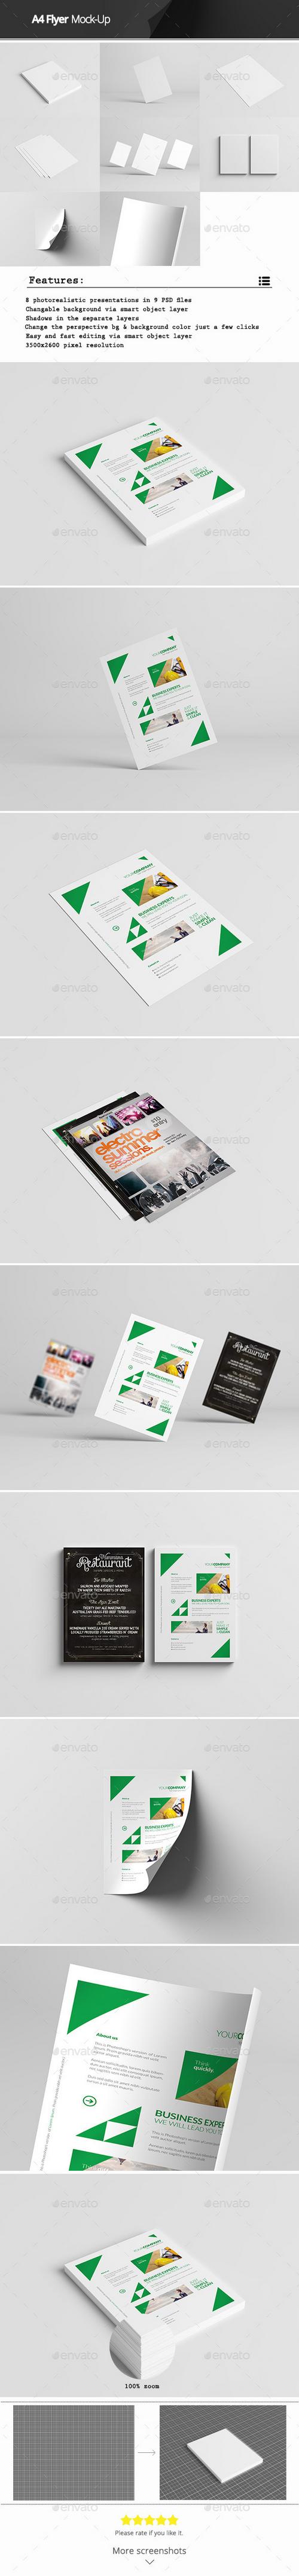 Graphicriver - A4 Flyer Mock-Up 10860291